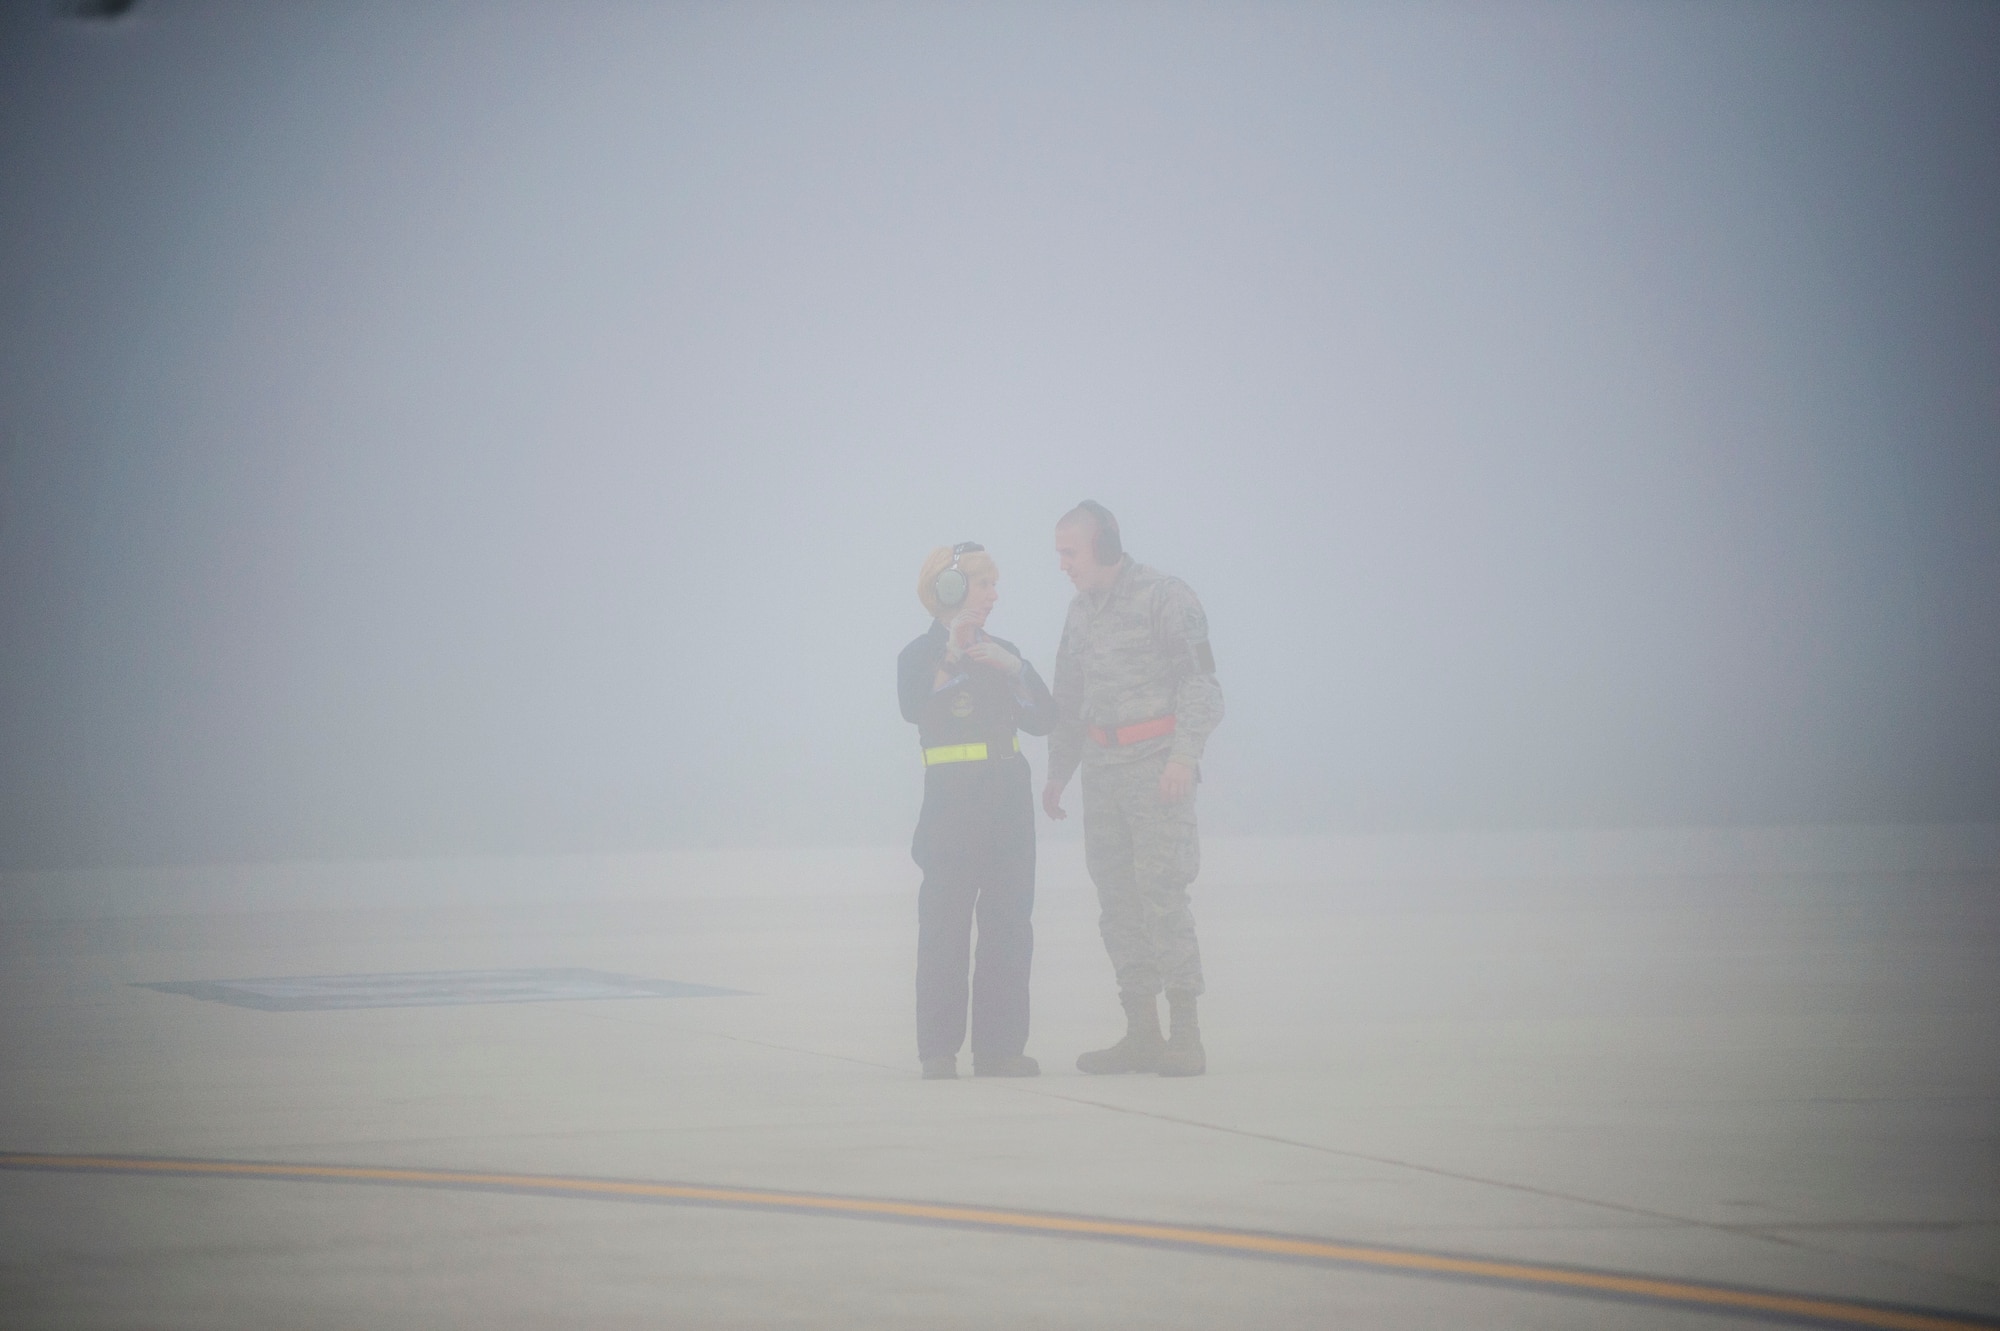 Tech. Sgt. Christine King (left), 512th Airlift Wing, explains to Airman 1st Class Anthony Mahon, 436th Airlift Wing, the procedures to marshalling an aircraft safely between other aircraft. As a dedicated crew chief, King frequently trains reserve and active-duty Airmen on C-17 maintenance and procedures, including aircraft marshalling. (U.S. Air Force photo/ Capt. Bernie Kale)